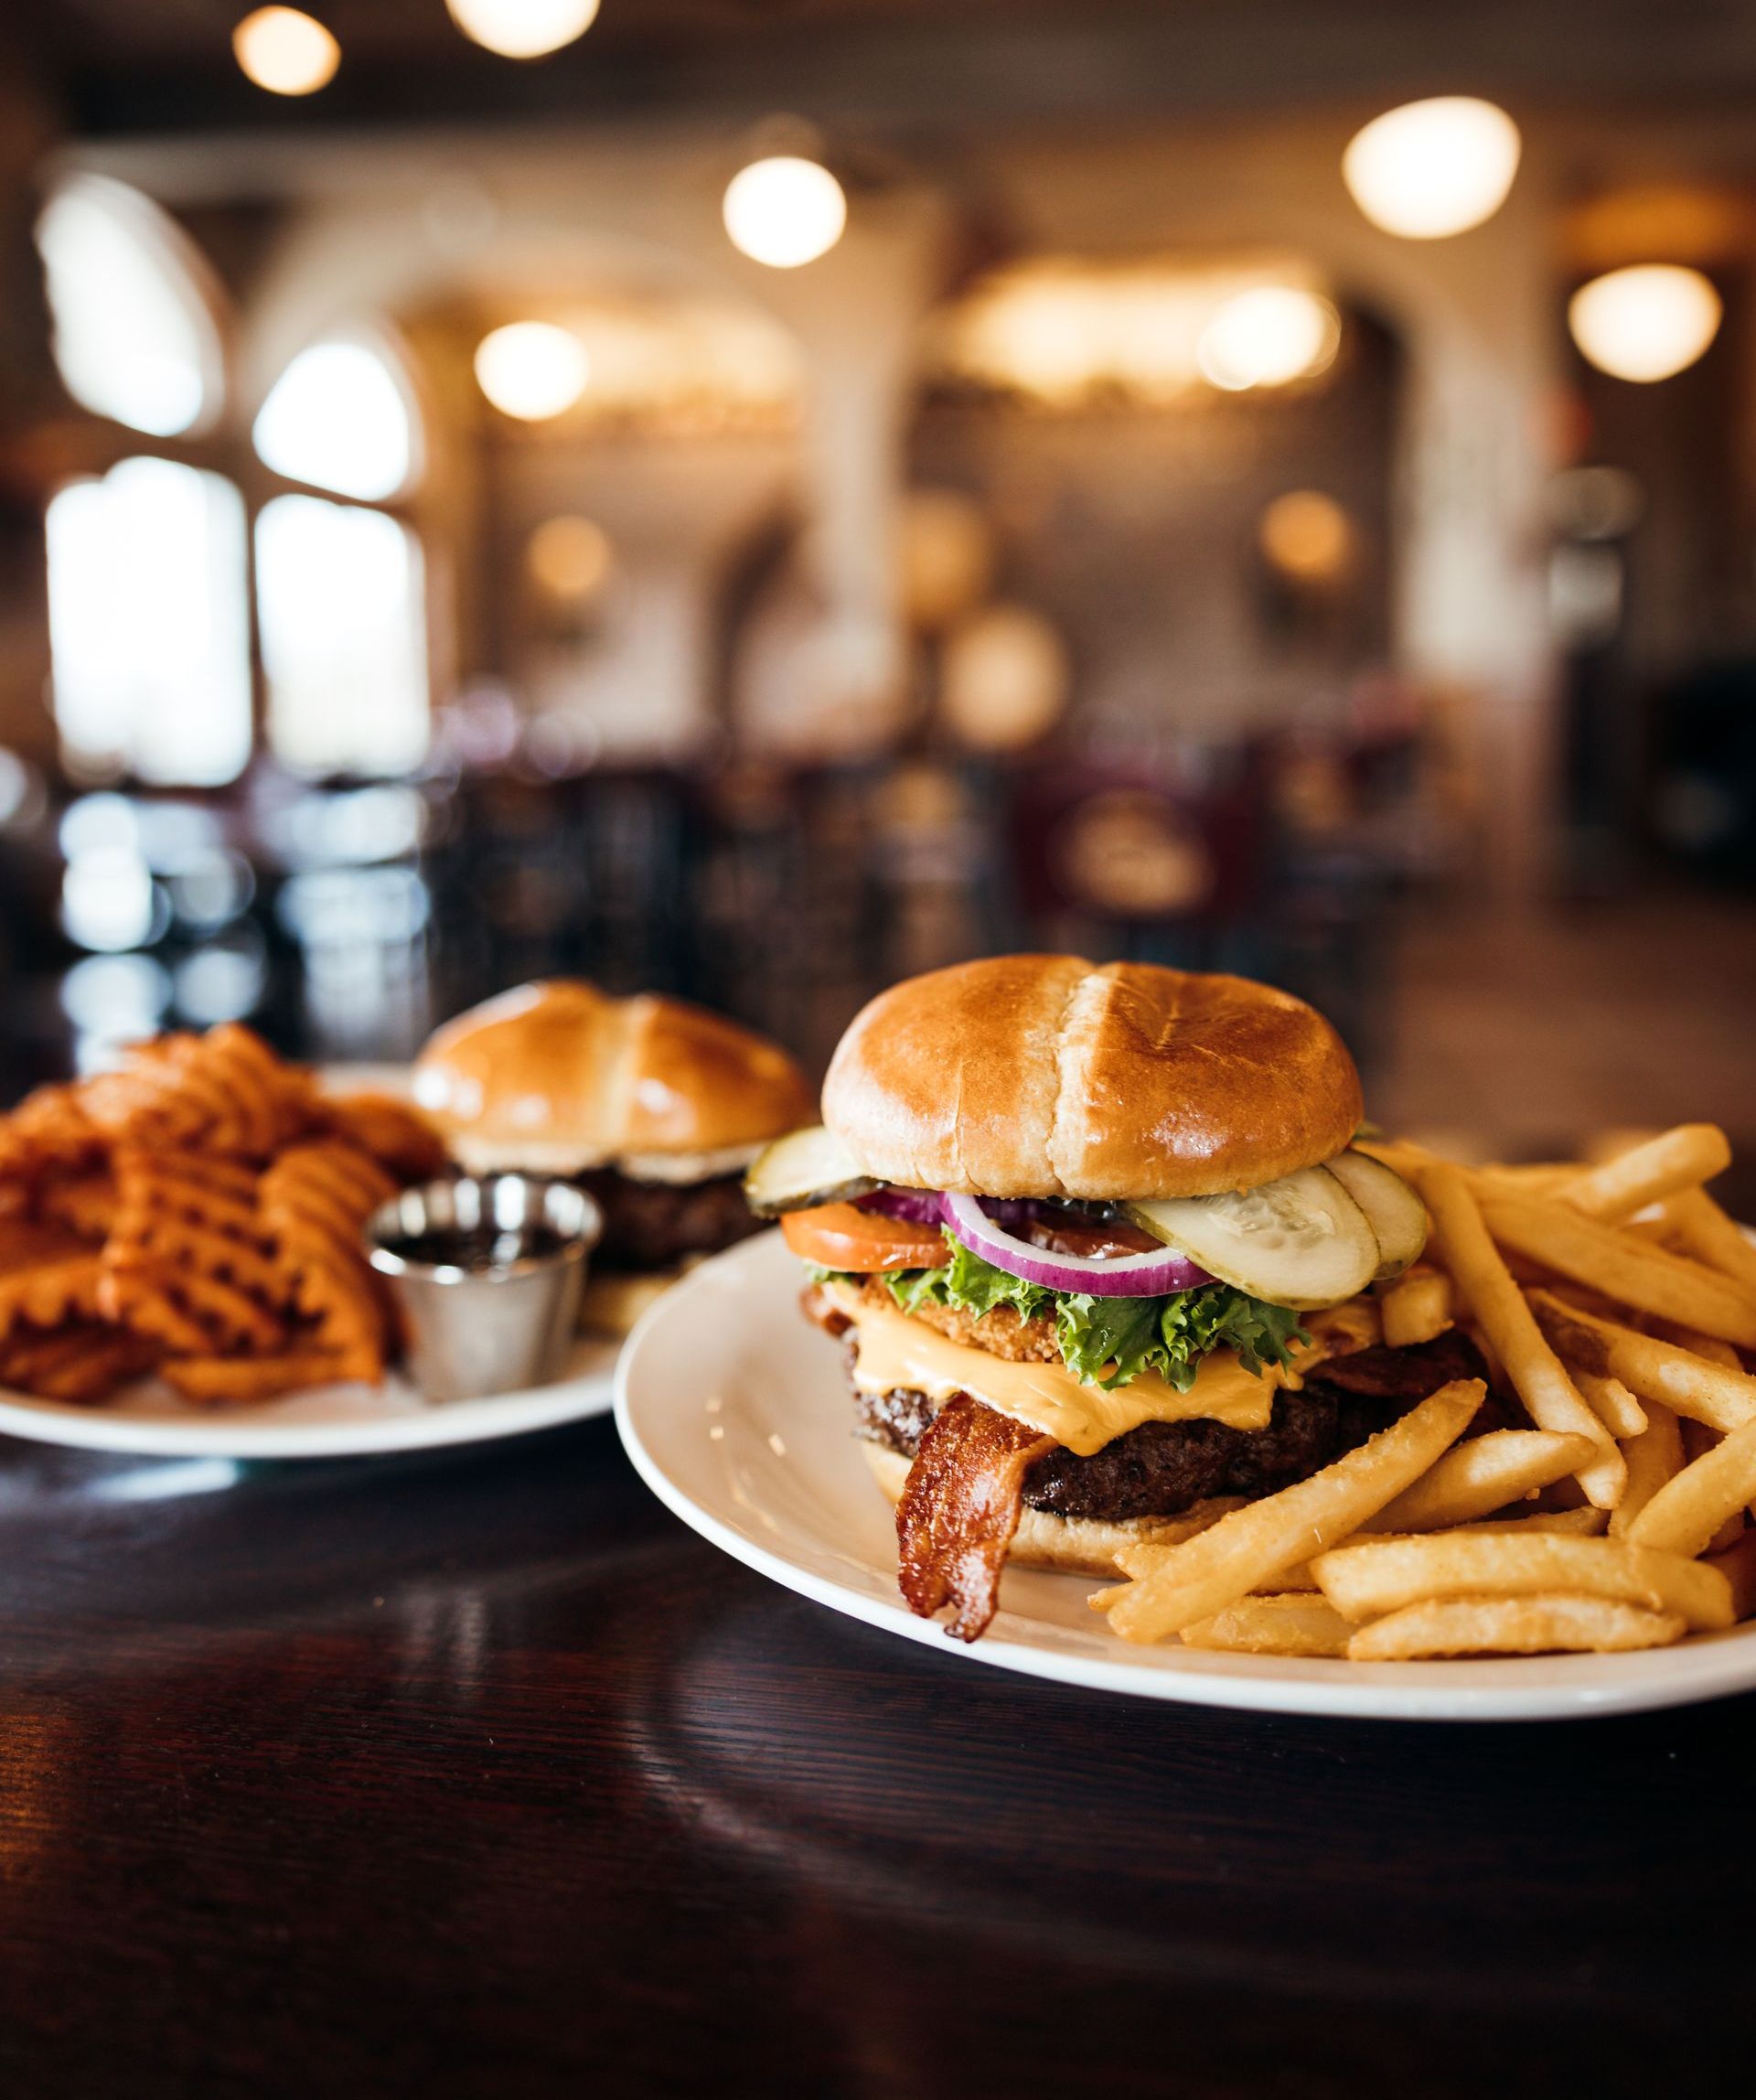 Try the Satisfying Burgers at Canterbury Hill Winery & Restaurant in Holts Summit, Missouri.